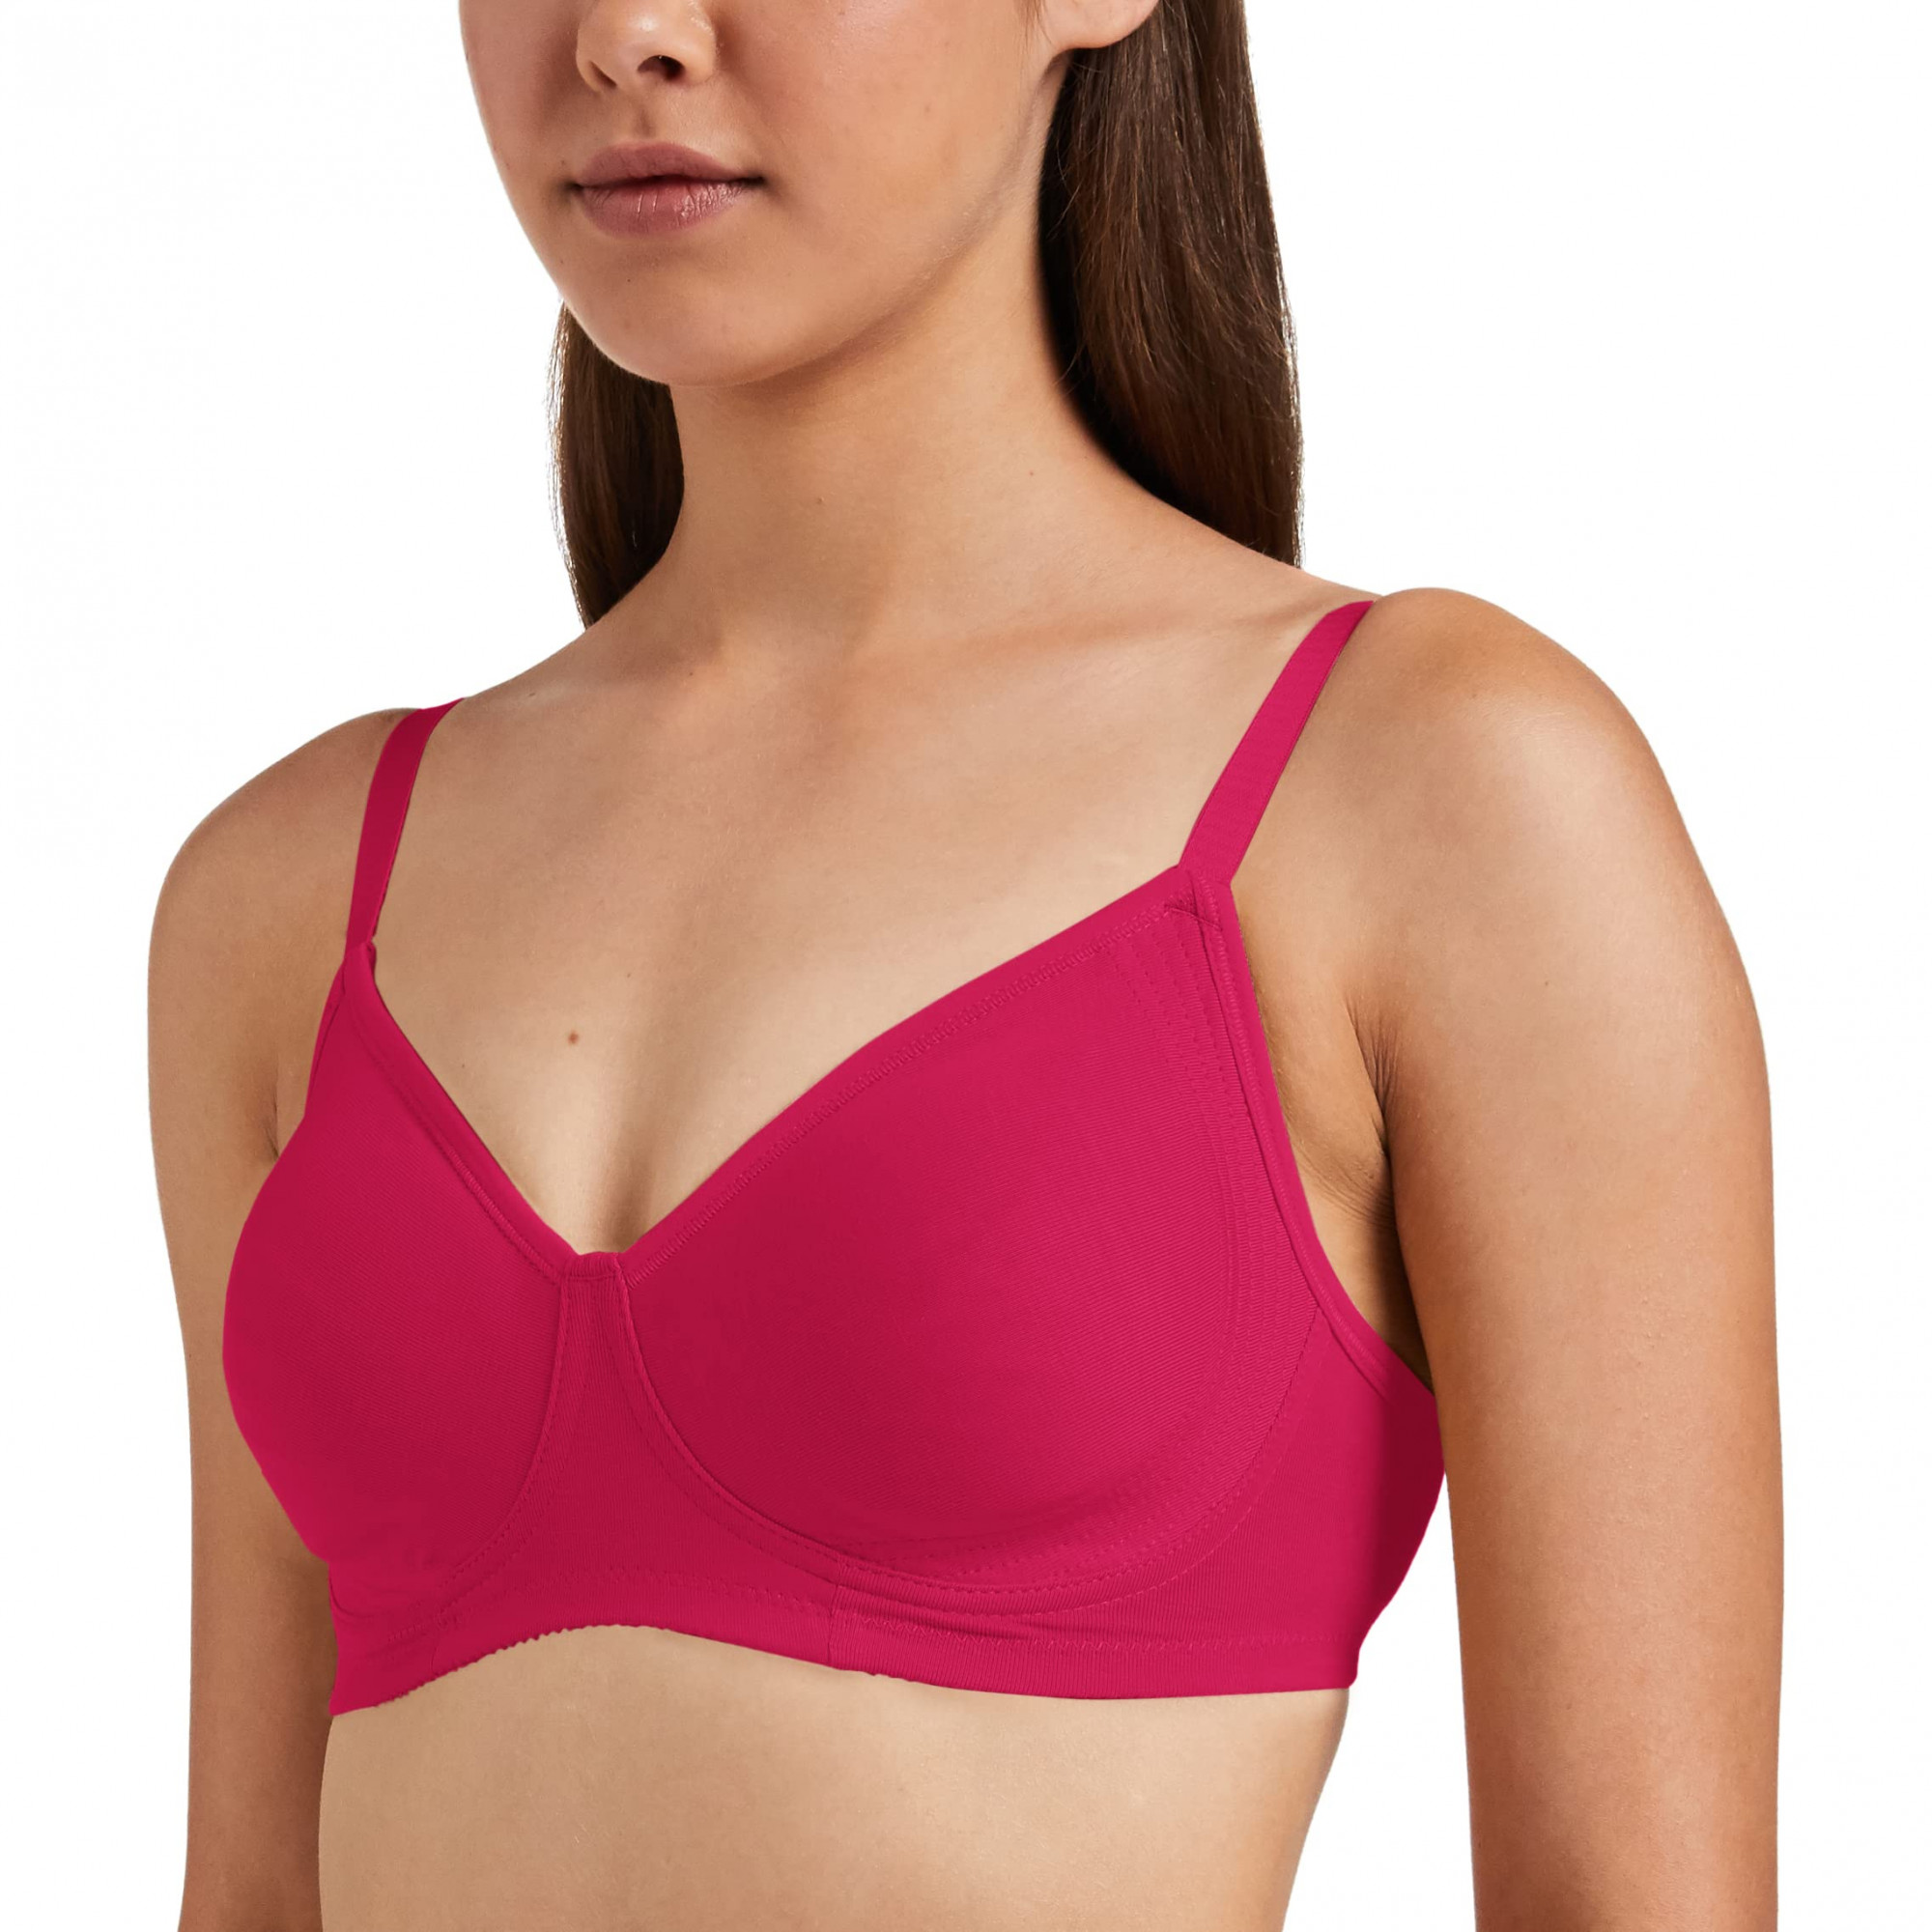 https://www.fastemi.com/uploads/fastemicom/products/enamor-a042-side-support-shaper-stretch-cotton-everyday-bra---non-padded-wire-free-amp-high-coveragesize-36b-160930312024933_l.jpg